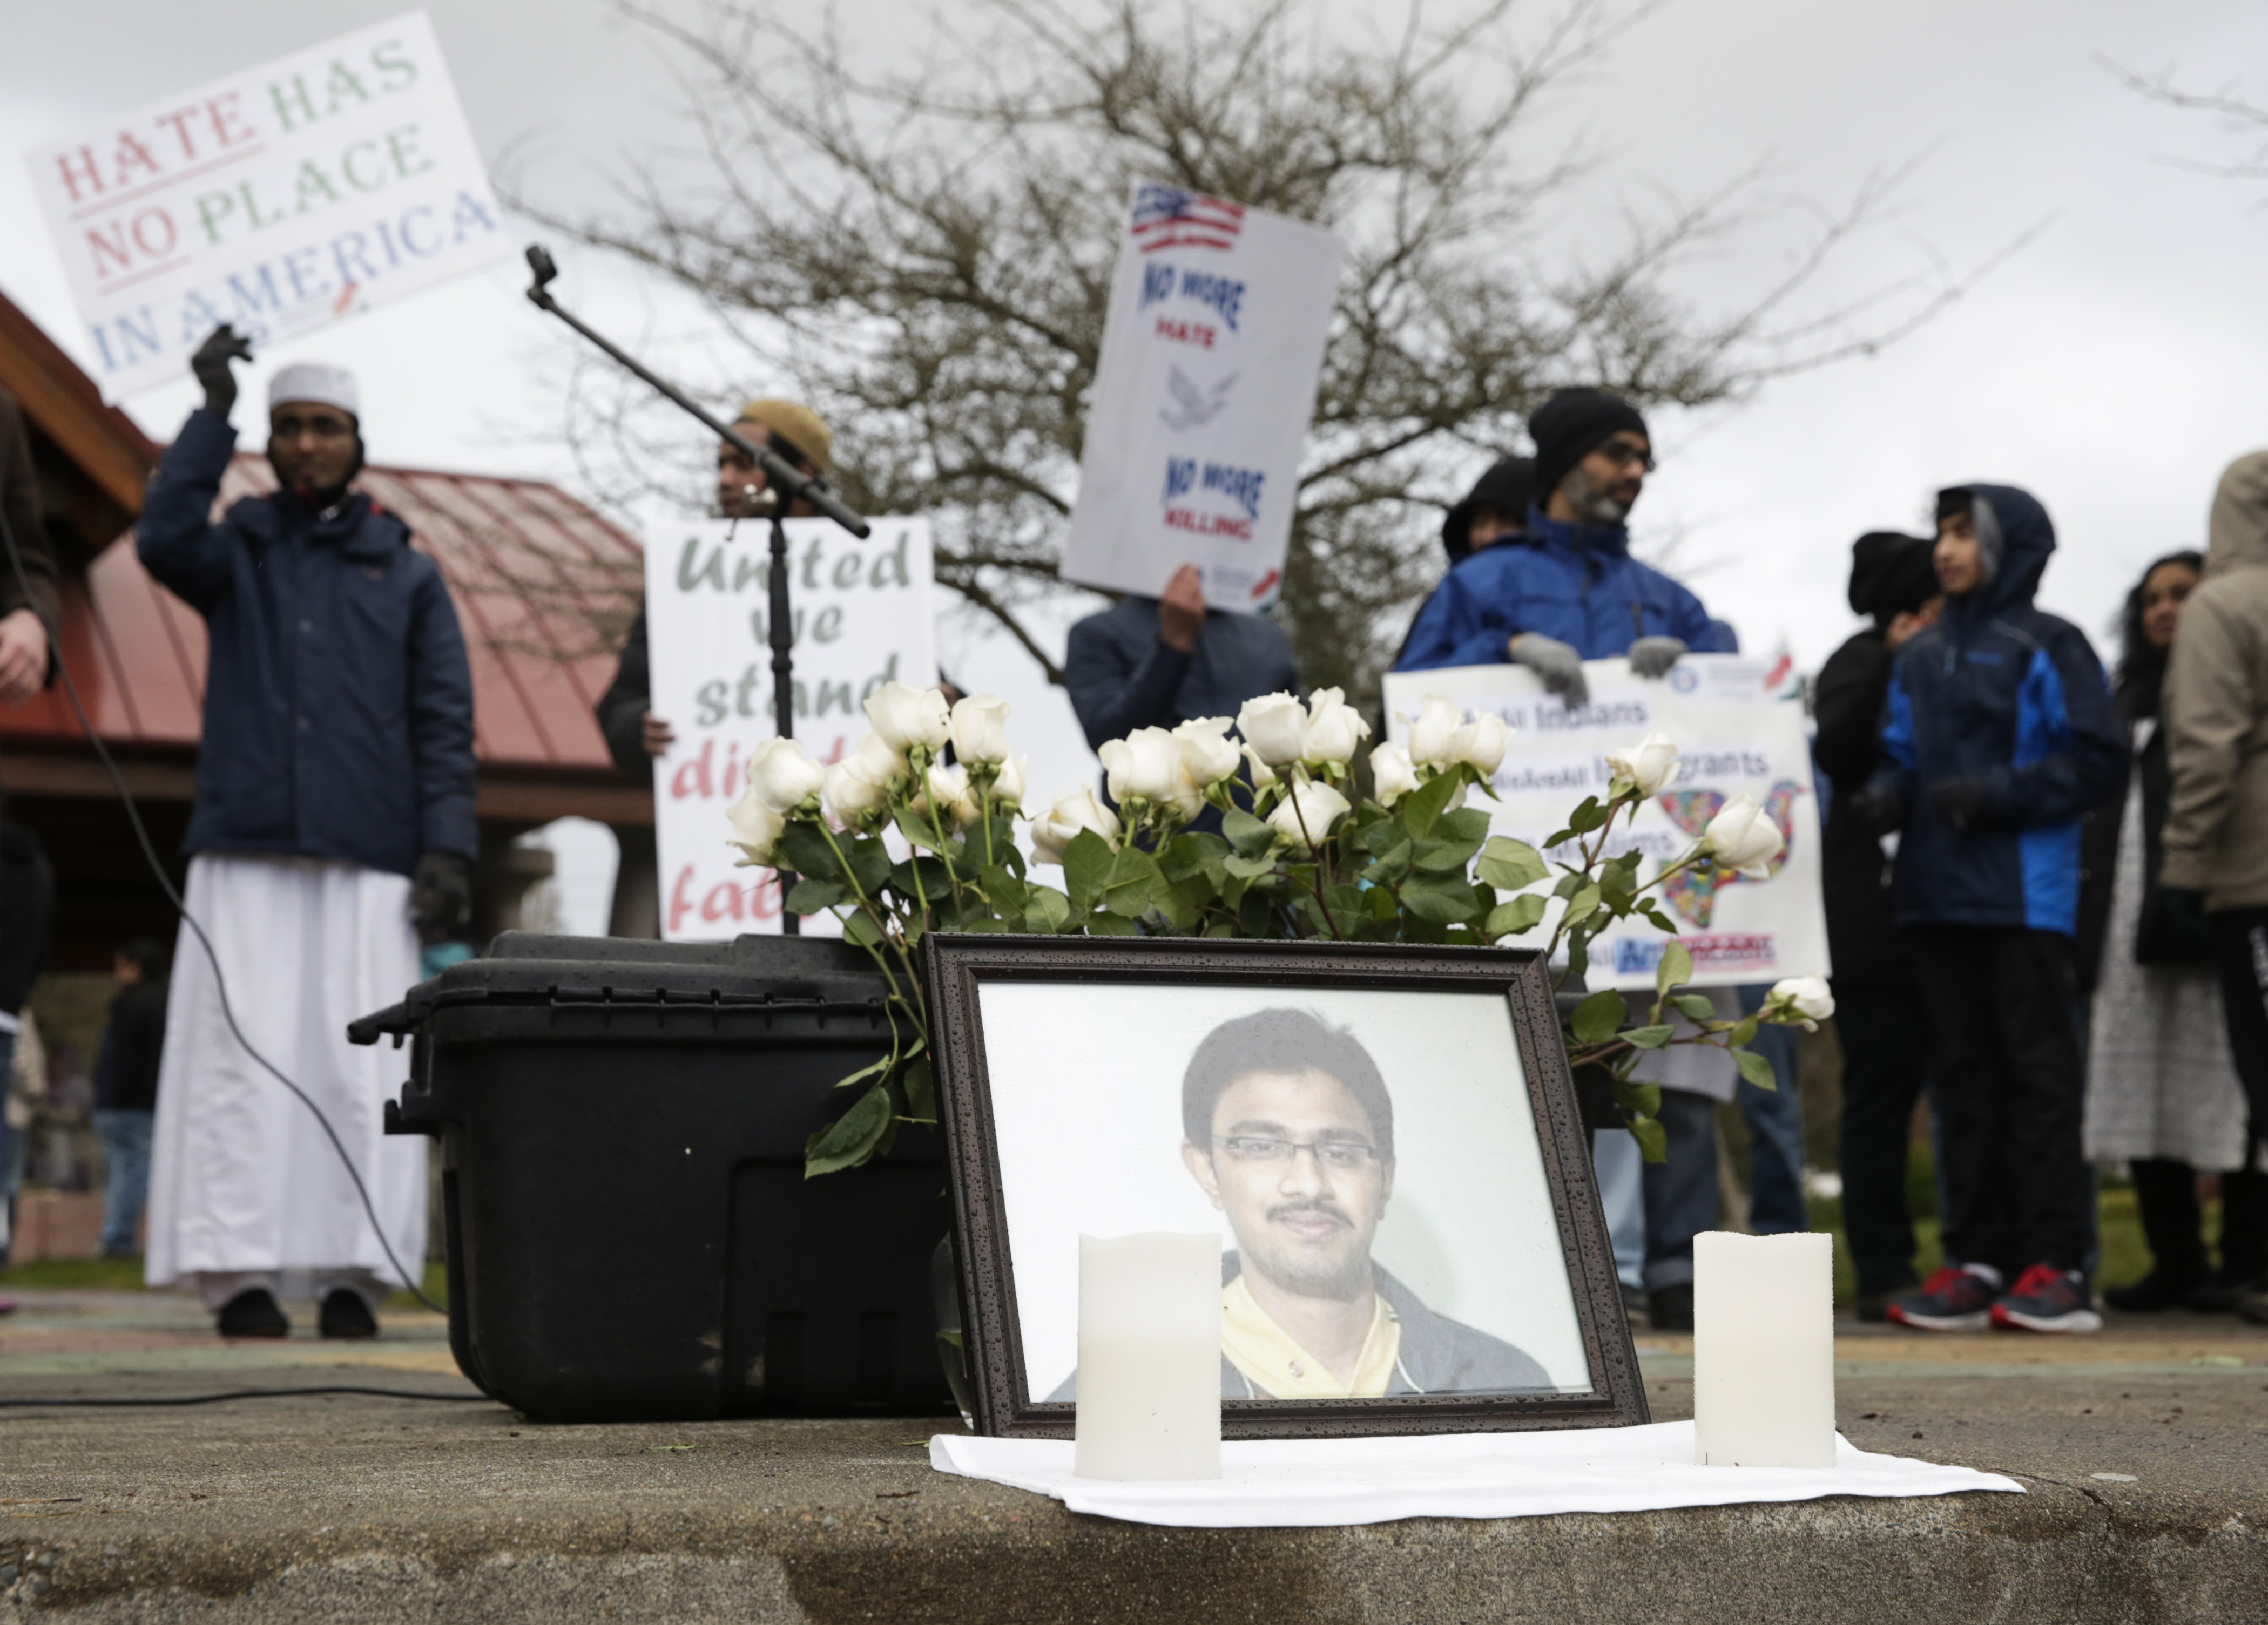 A photo of Srinivas Kuchibhotla, the 32-year-old Indian engineer killed at a bar in Olathe, Kansas, is pictured during a peace vigil in Bellevue, Washington on March 5, 2017 (Jason Redmond&mdash;AFP/Getty Images)